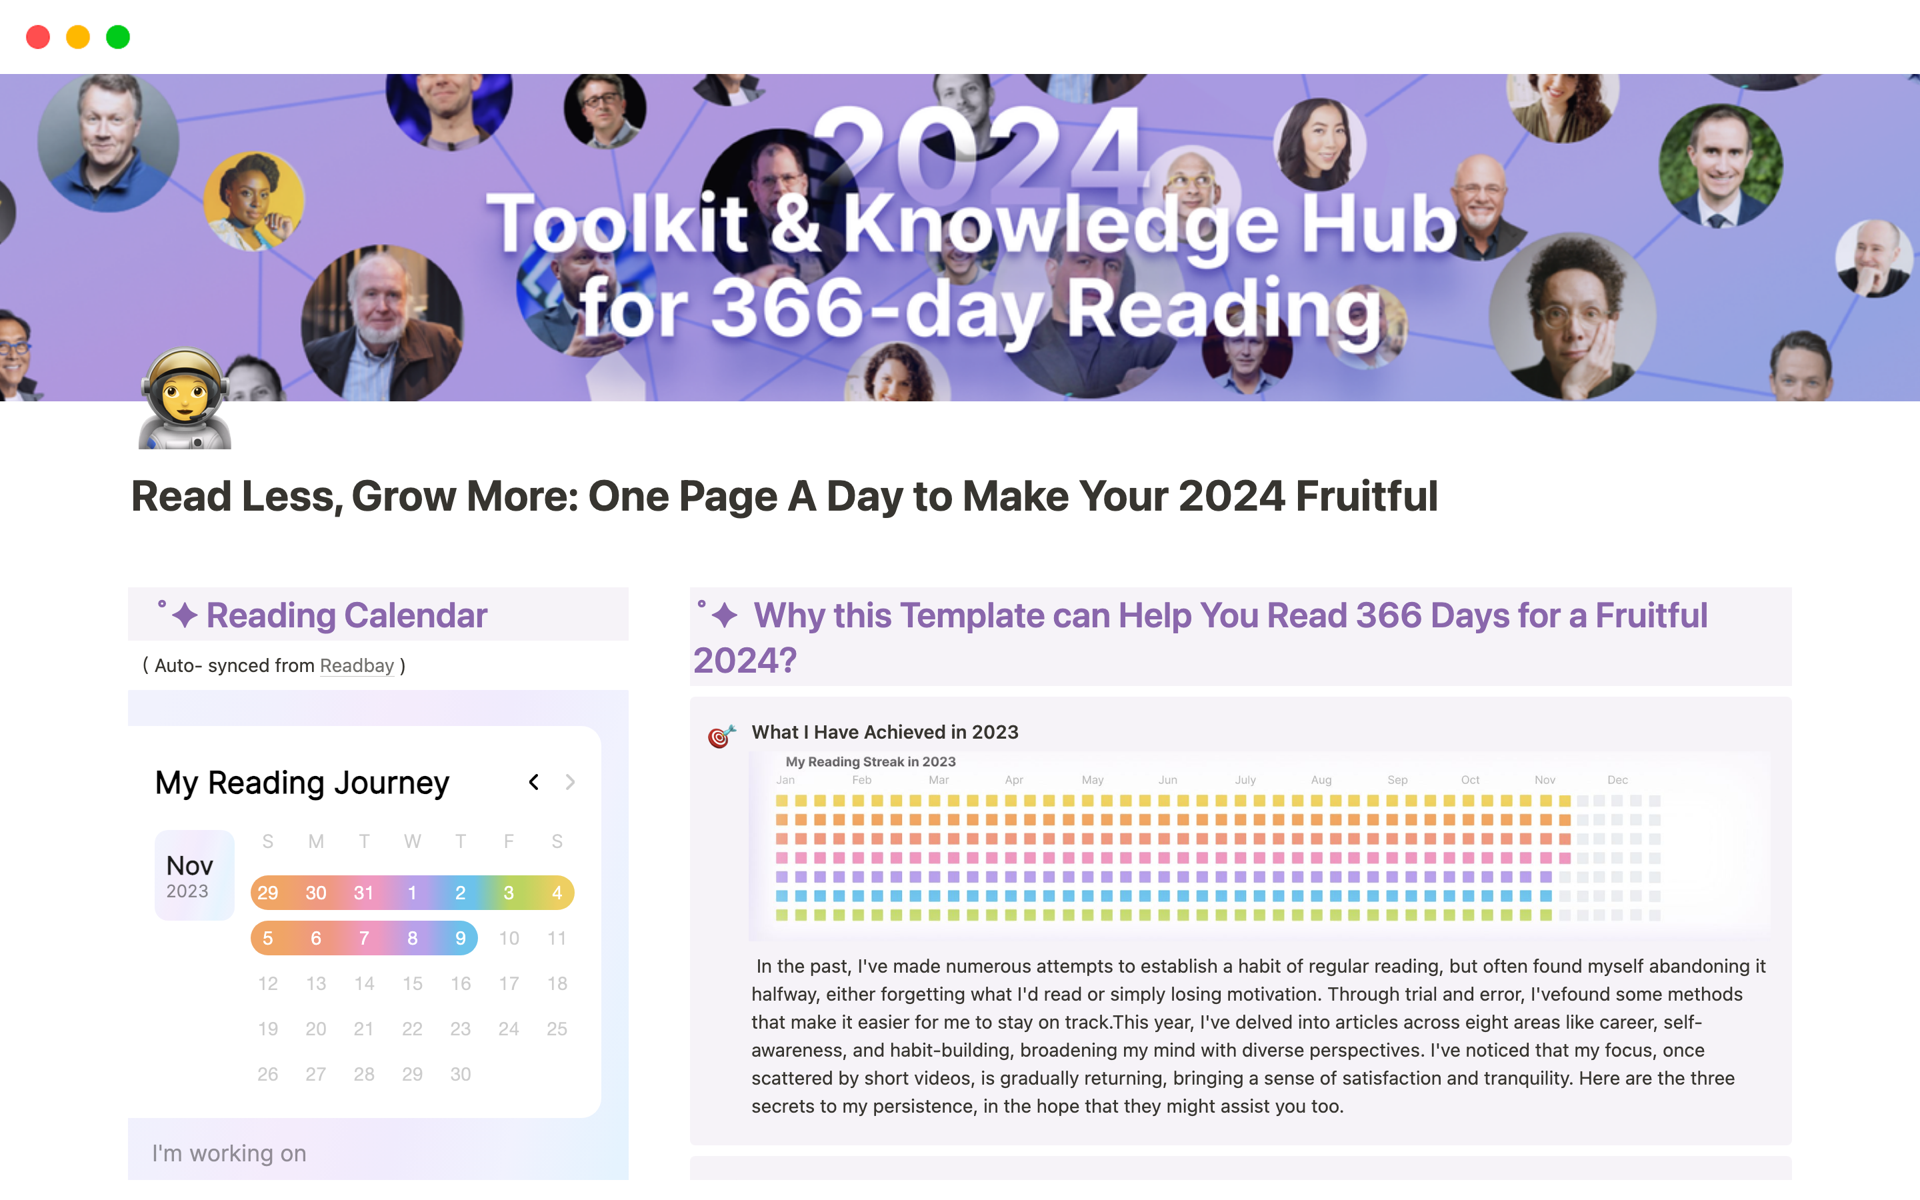 Get ready for the 2024 366-Day Reading Challenge: A collection of 200+ articles from great minds in 8 categories,one page a day to push your boundaries. 